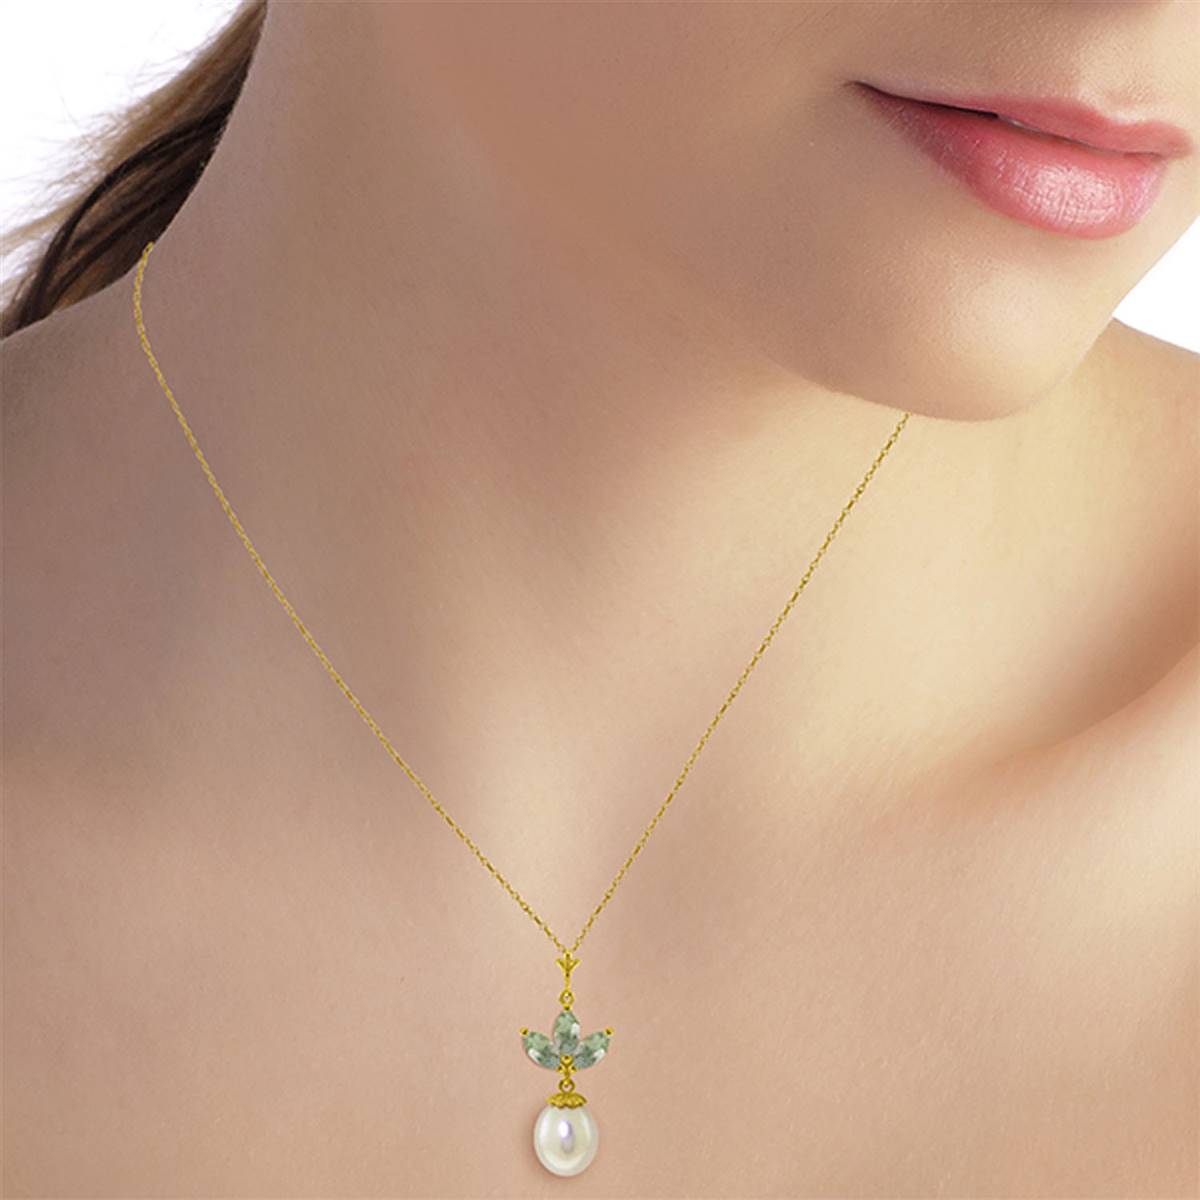 4.75 Carat 14K Solid Yellow Gold Necklace Pearl Green Amethyst